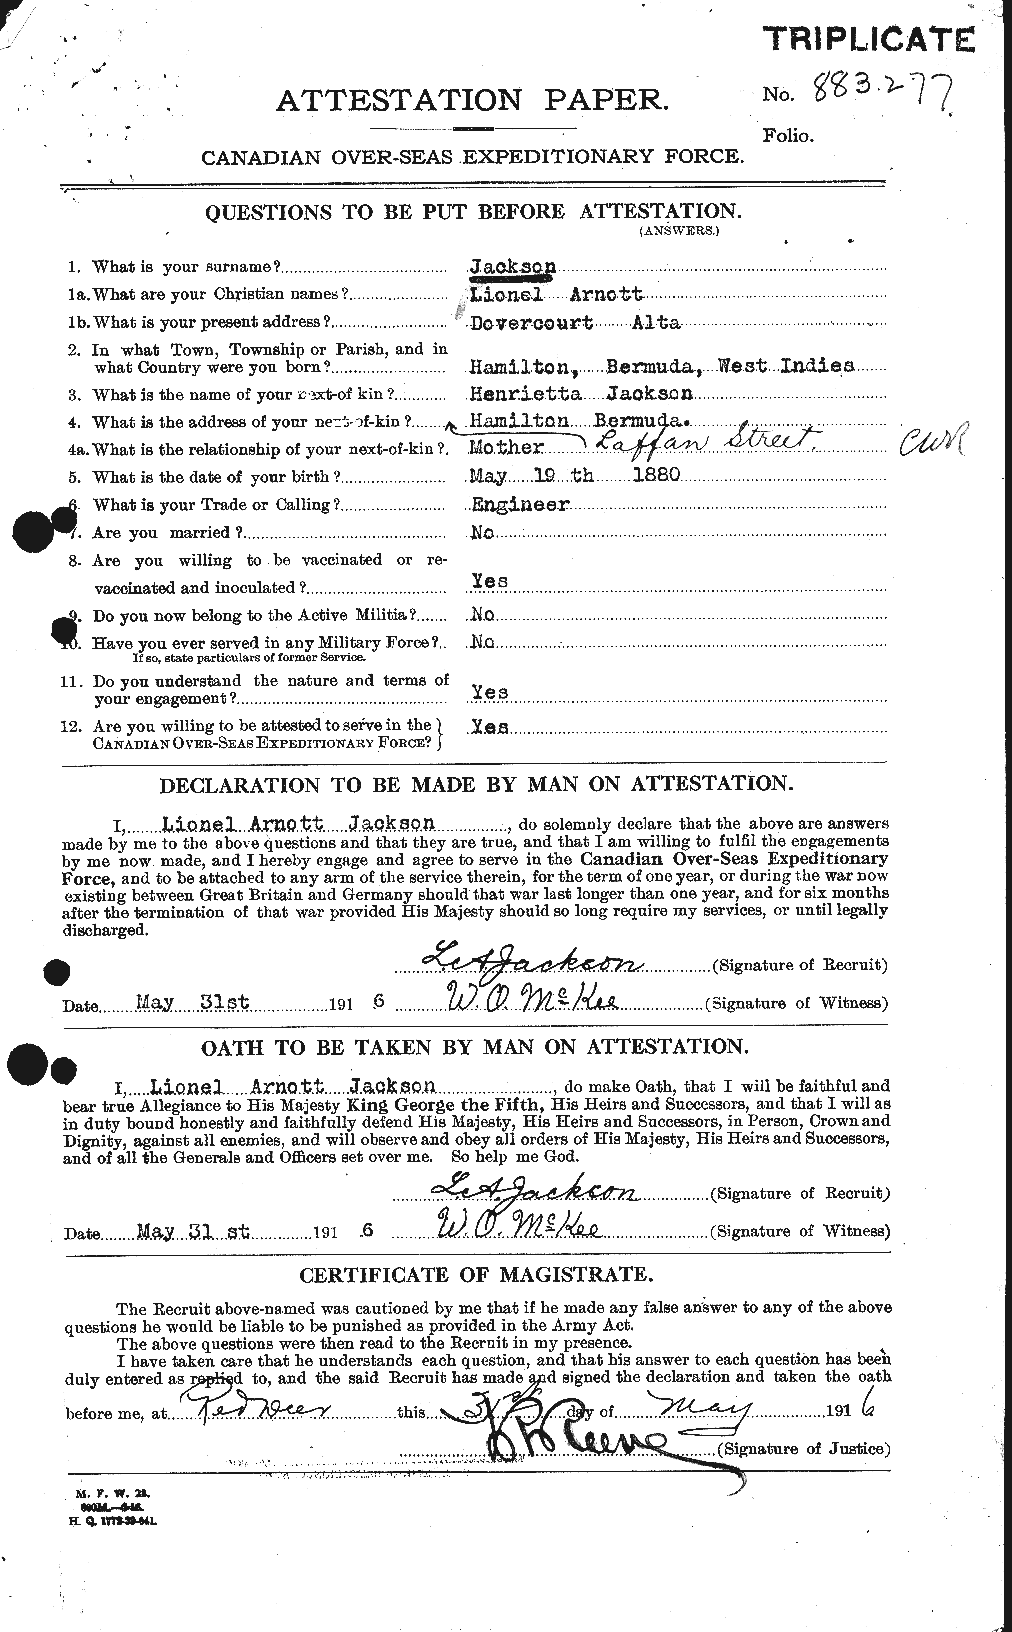 Personnel Records of the First World War - CEF 414410a